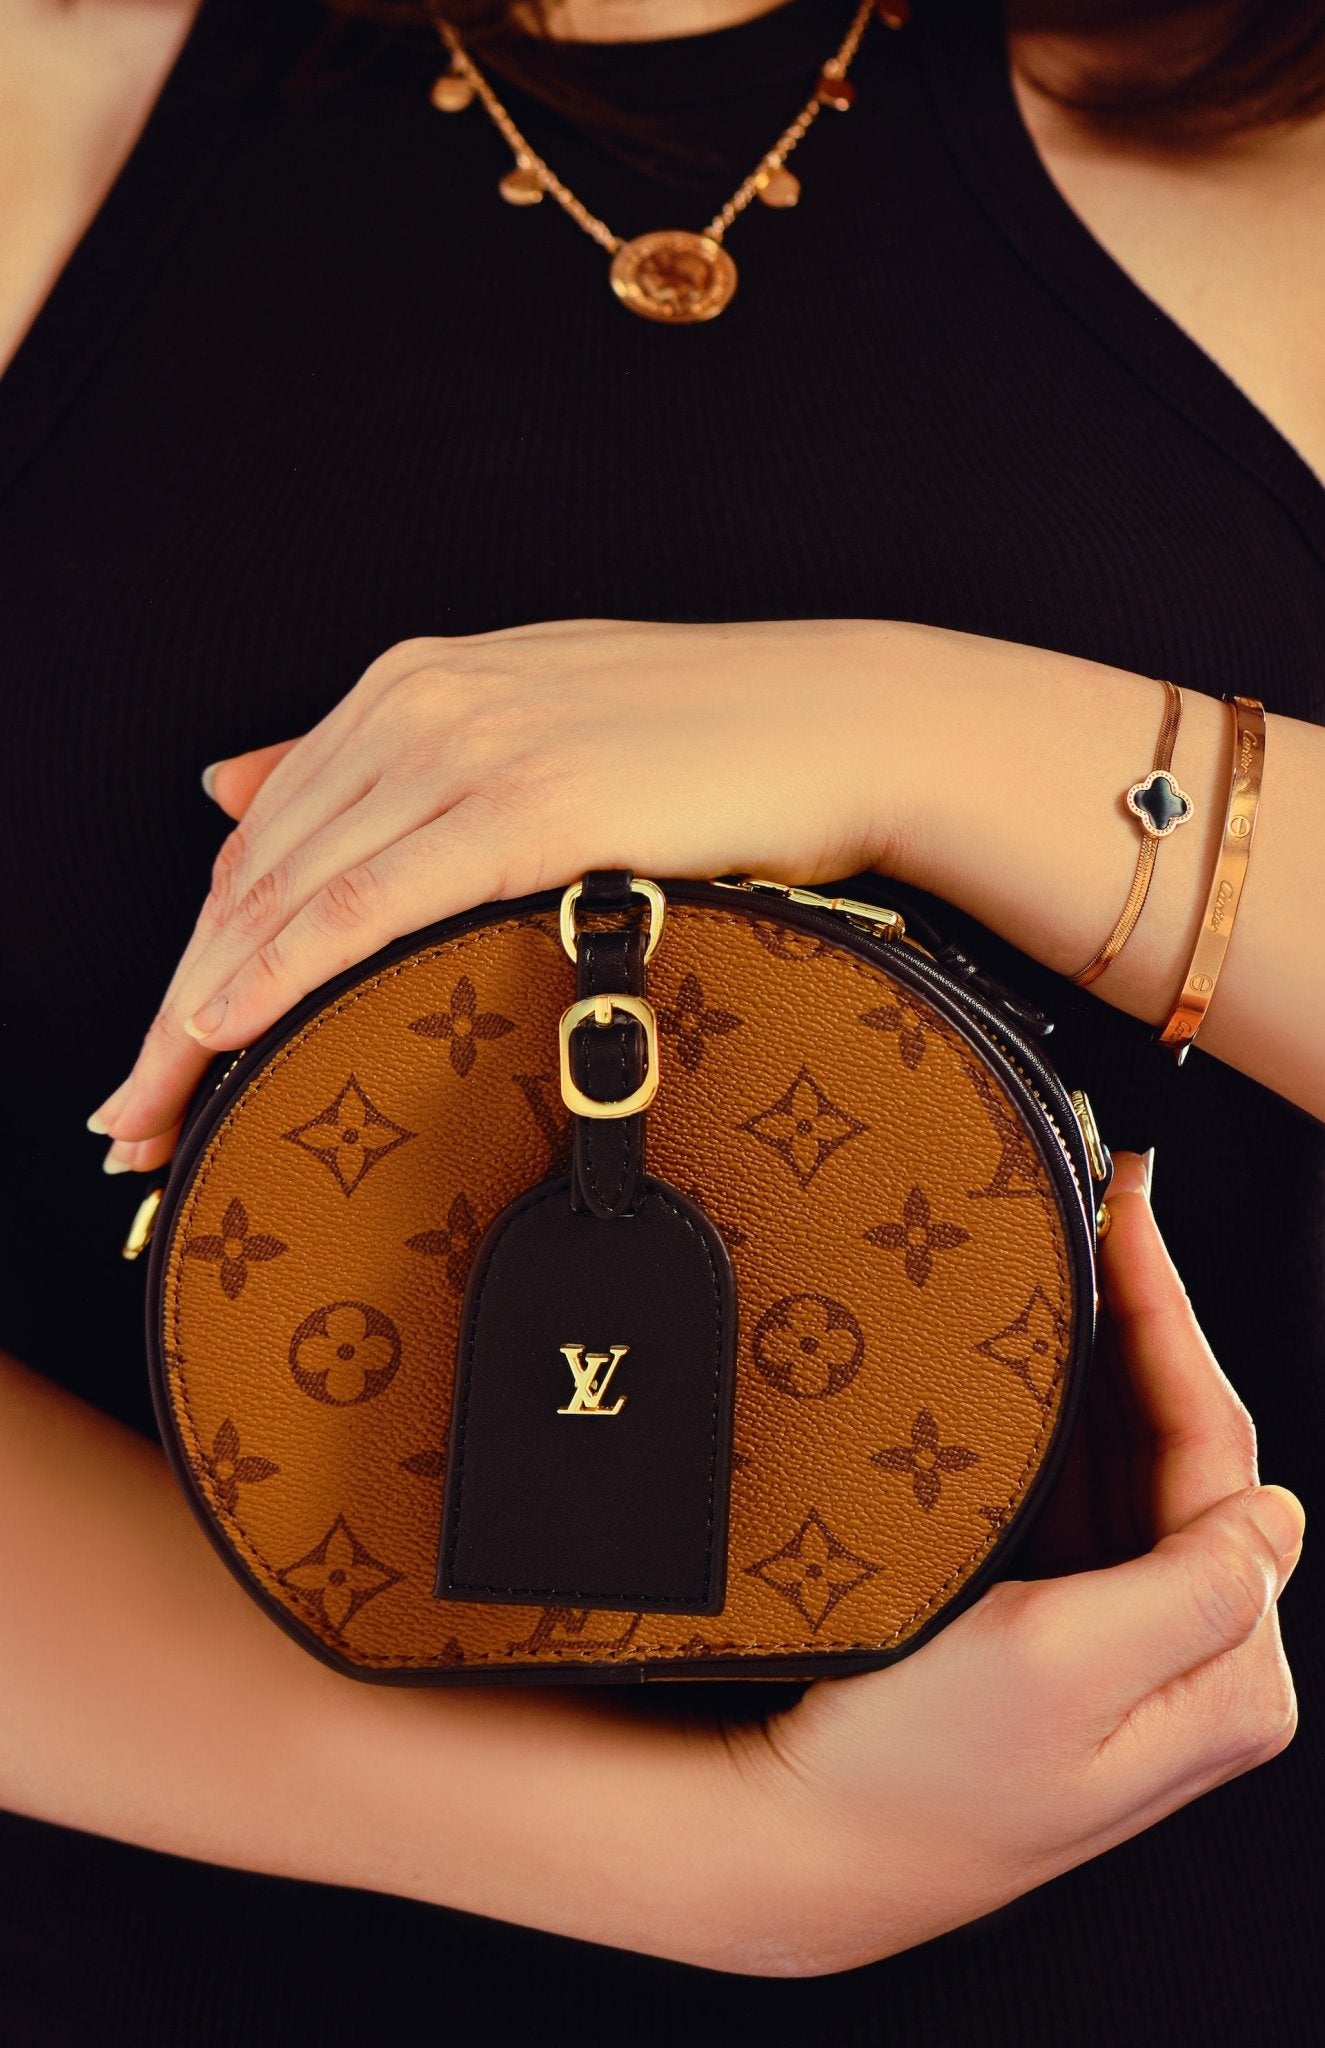 Our Expert Guide to Authenticating Luxury Handbags: Tips and Tricks - Levelux Bag